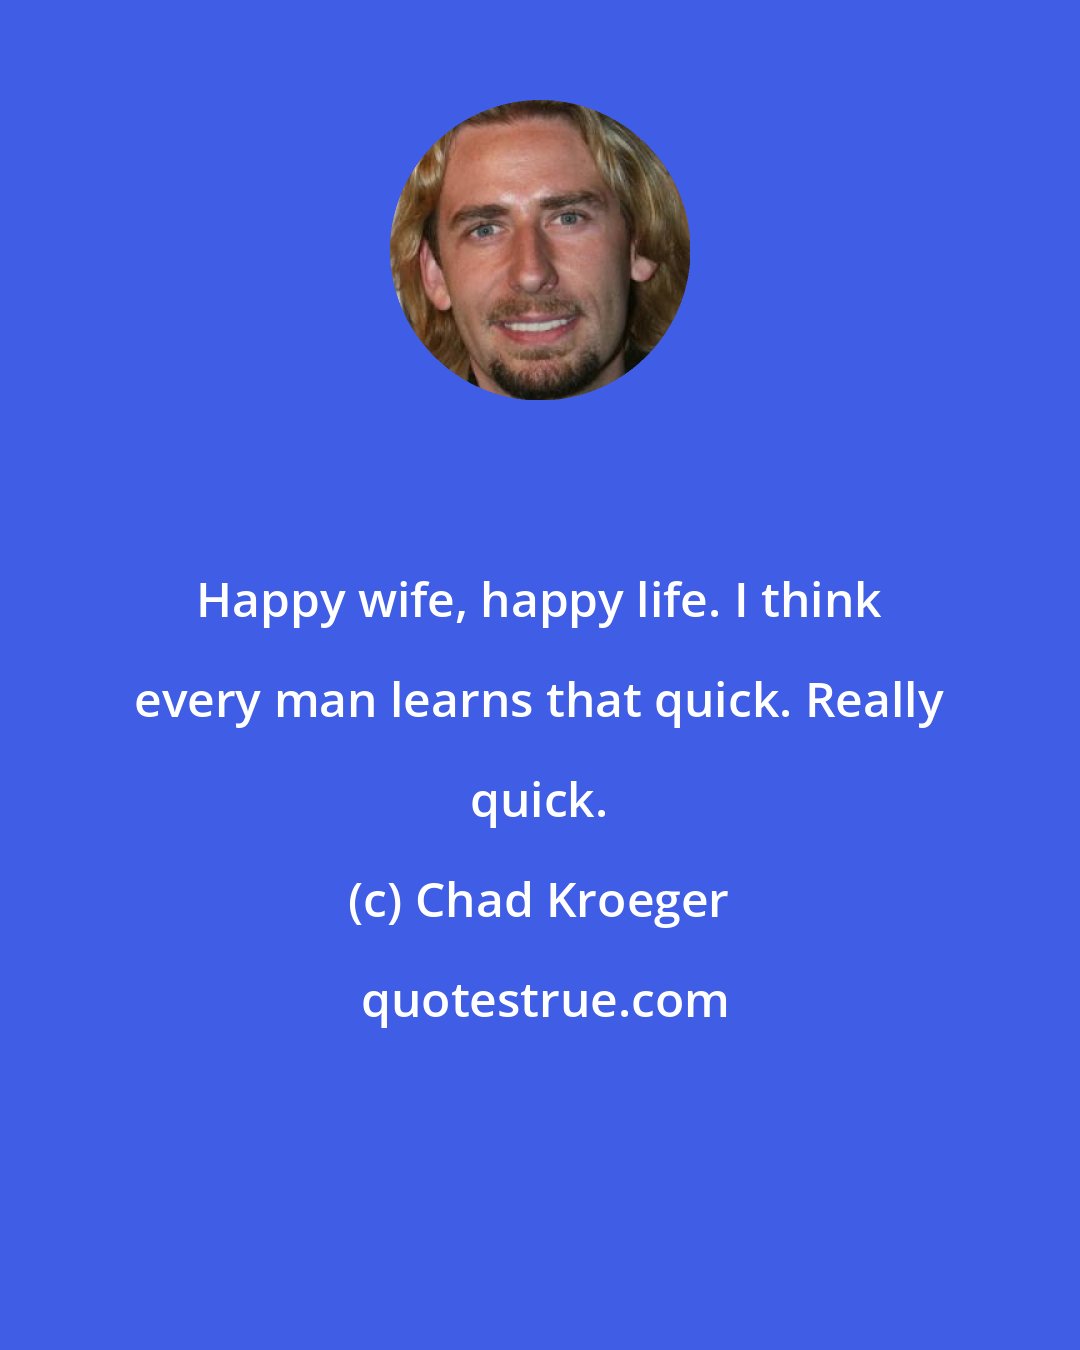 Chad Kroeger: Happy wife, happy life. I think every man learns that quick. Really quick.